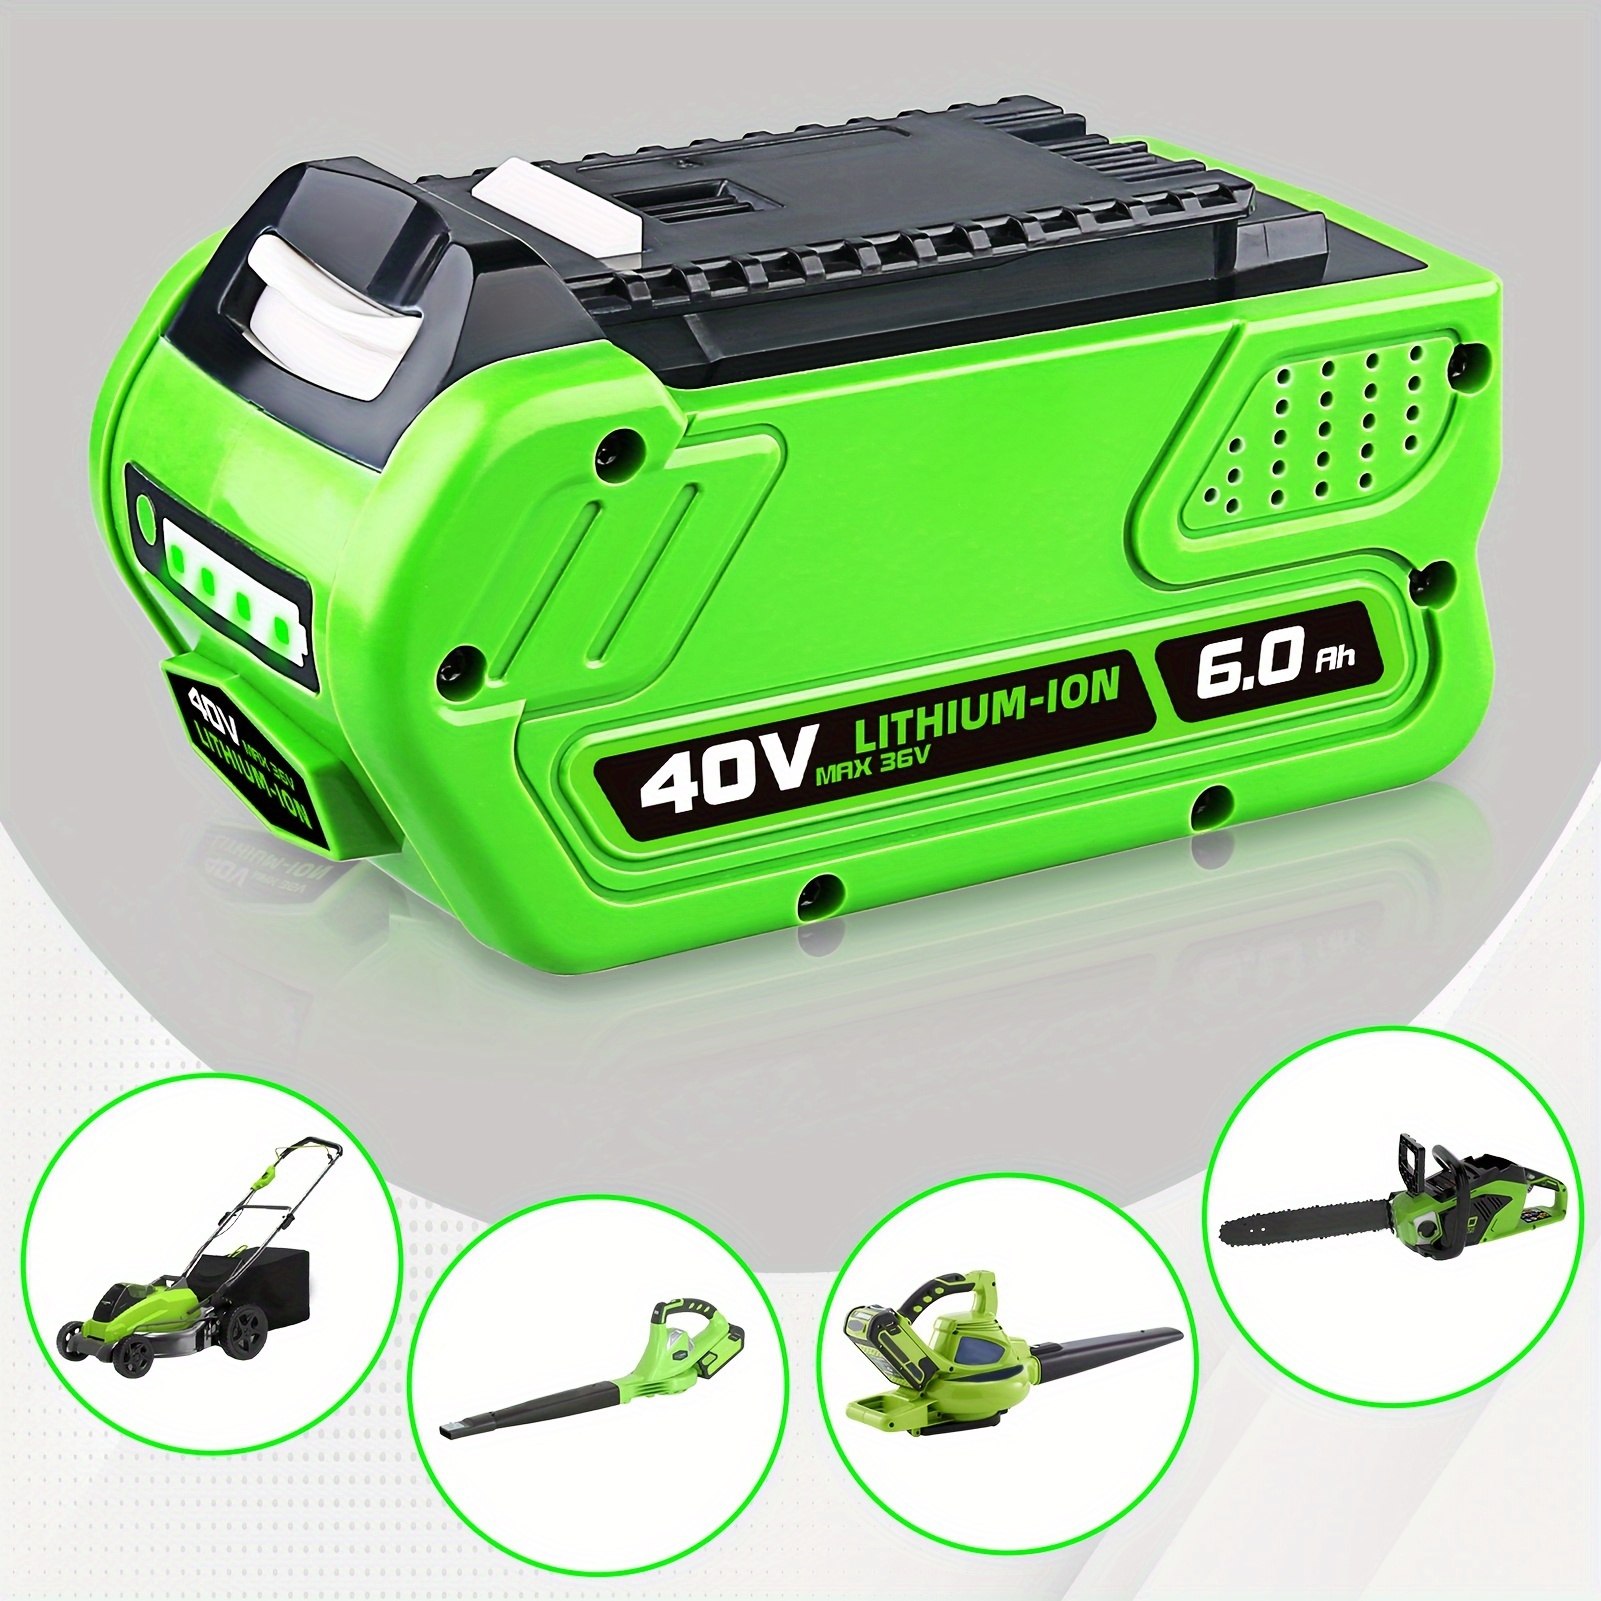 

1pcs/2pcs 40v 6000mah Replacement Battery For Battery 29472 29462 29252 20202 22262 25312 21242 Lithium Ion Battery Compatible With For Greenworks Battery 40 Volt Cordless Chainsaw Power Tools